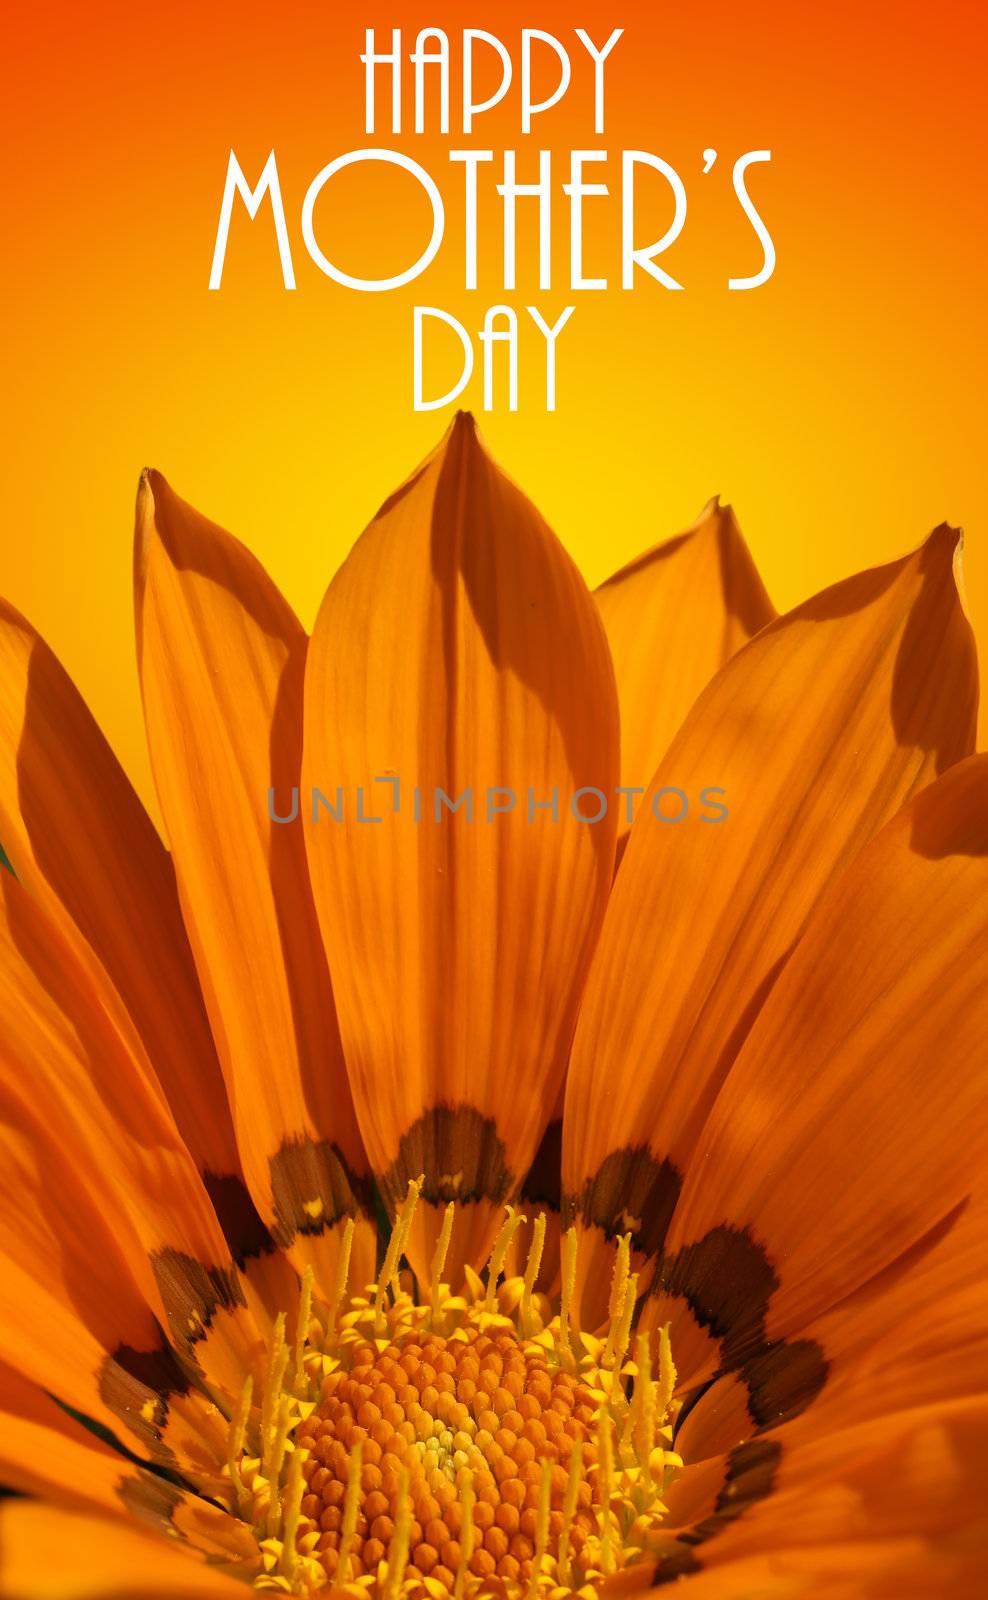 Happy mother's day card with bright orange flower as background